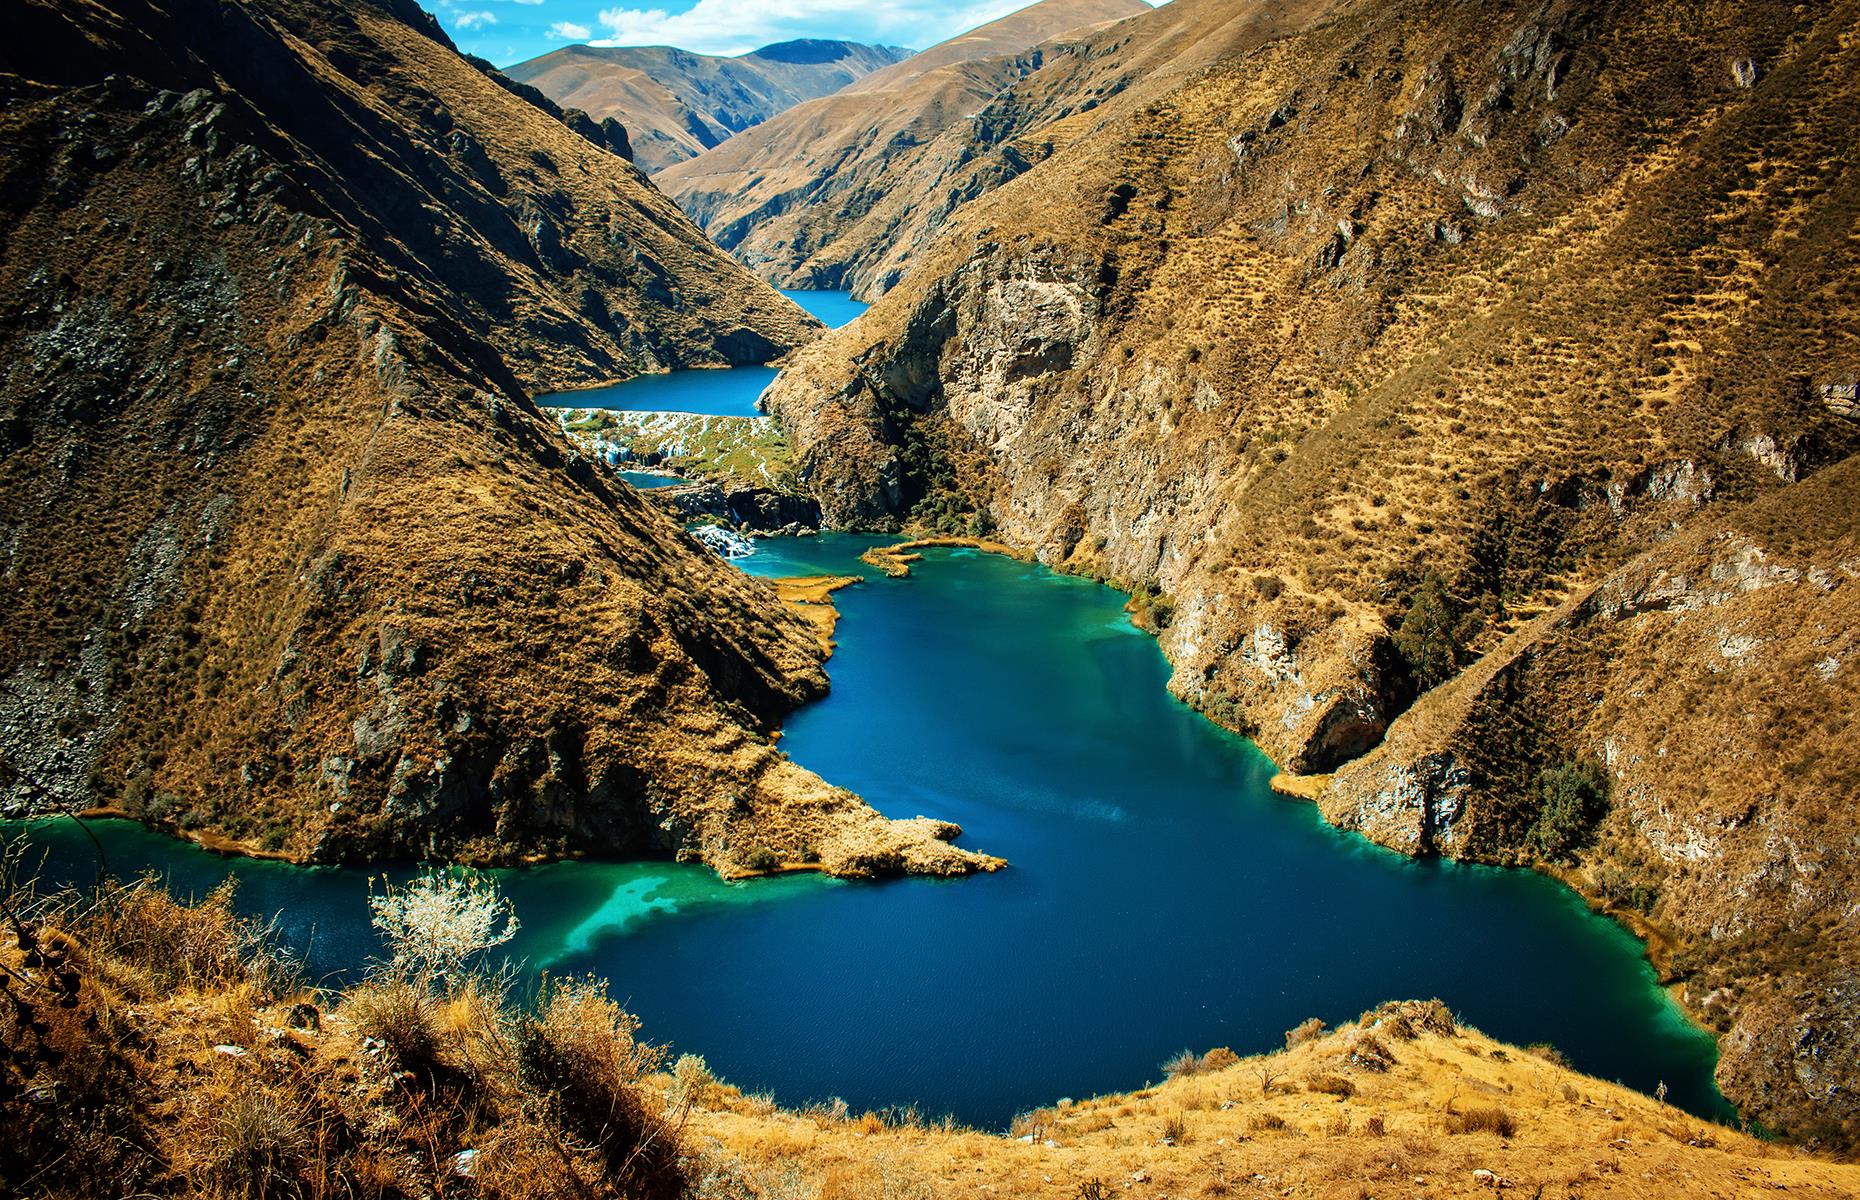 The trip takes 12 hours to complete and travels through the Nor Yauyos-Cochas Landscape Reserve, one of Peru's most important protected areas with breathtaking landscapes. Make sure to plan the trip carefully as the trains only run once or twice a month. One-way fares start from $109 (£87).